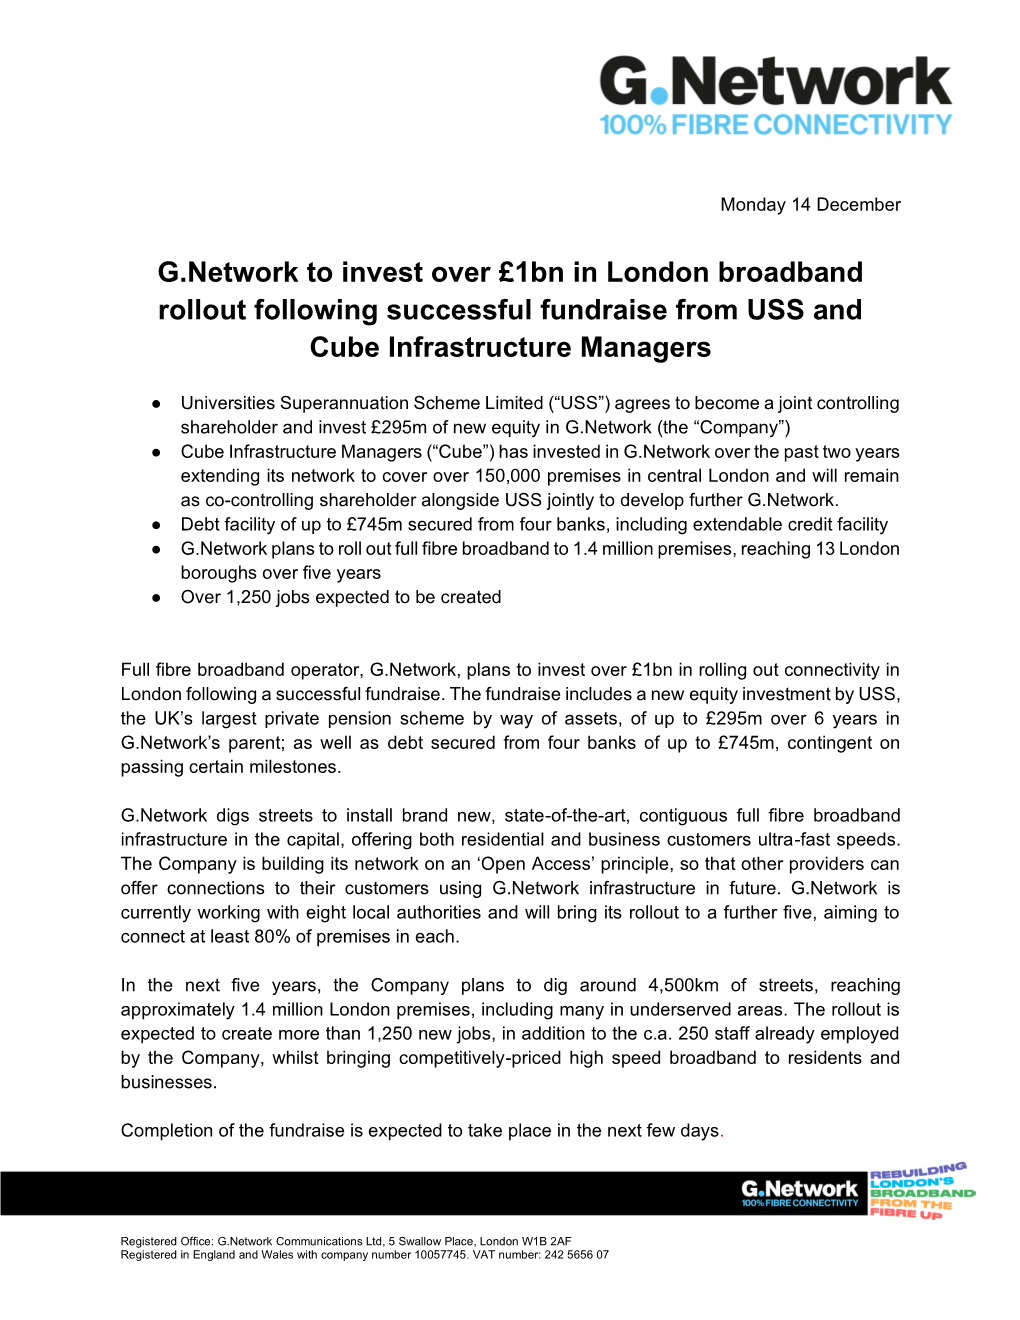 G.Network to Invest Over £1Bn in London Broadband Rollout Following Successful Fundraise from USS and Cube Infrastructure Managers